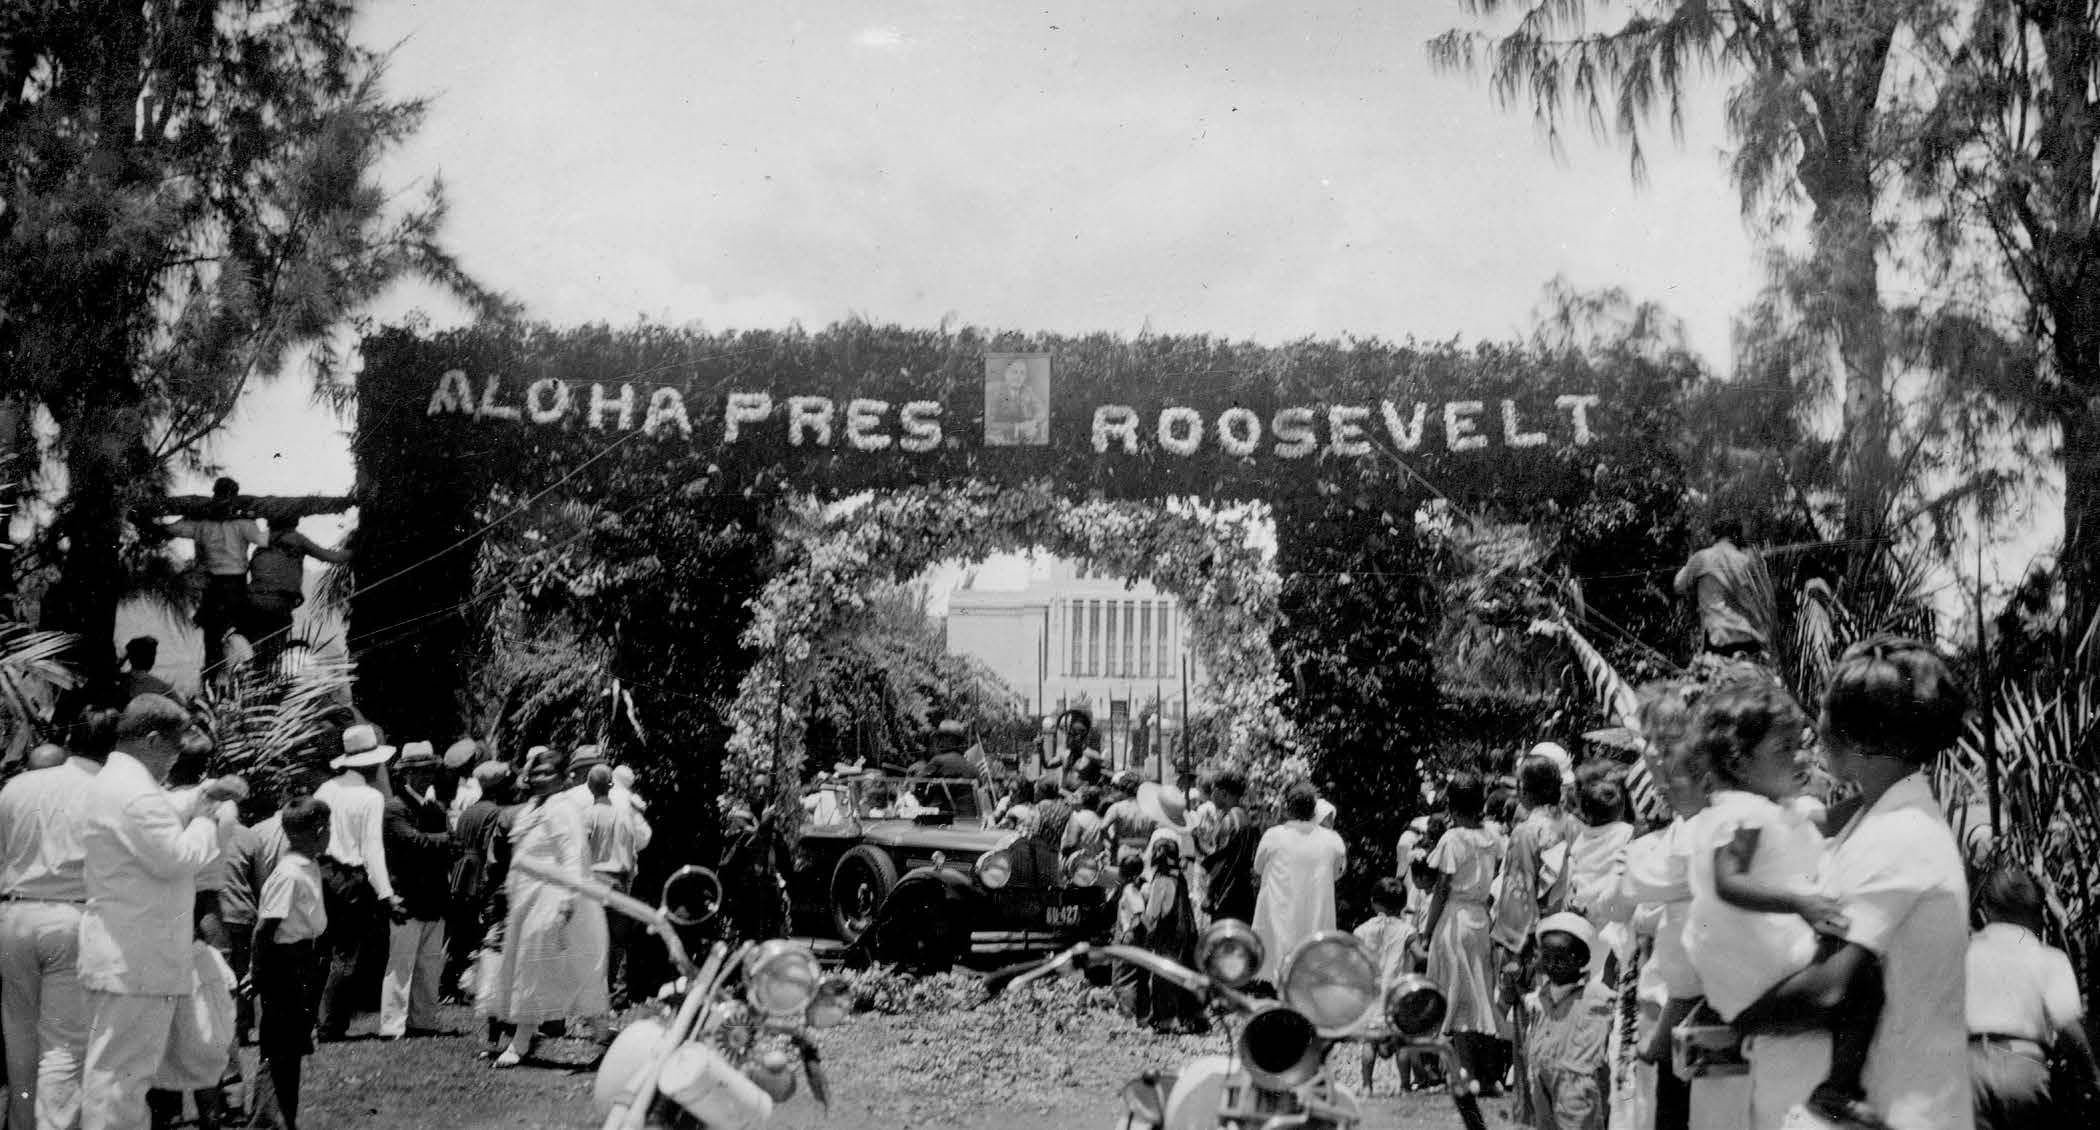 In 1934 the Lāʻie community received President Franklin D. Roosevelt in front of the temple during his tour of Hawaiʻi. President Roosevelt is in the car beneath the archway with the temple in the background. Courtesy of BYU–Hawaii Archives.